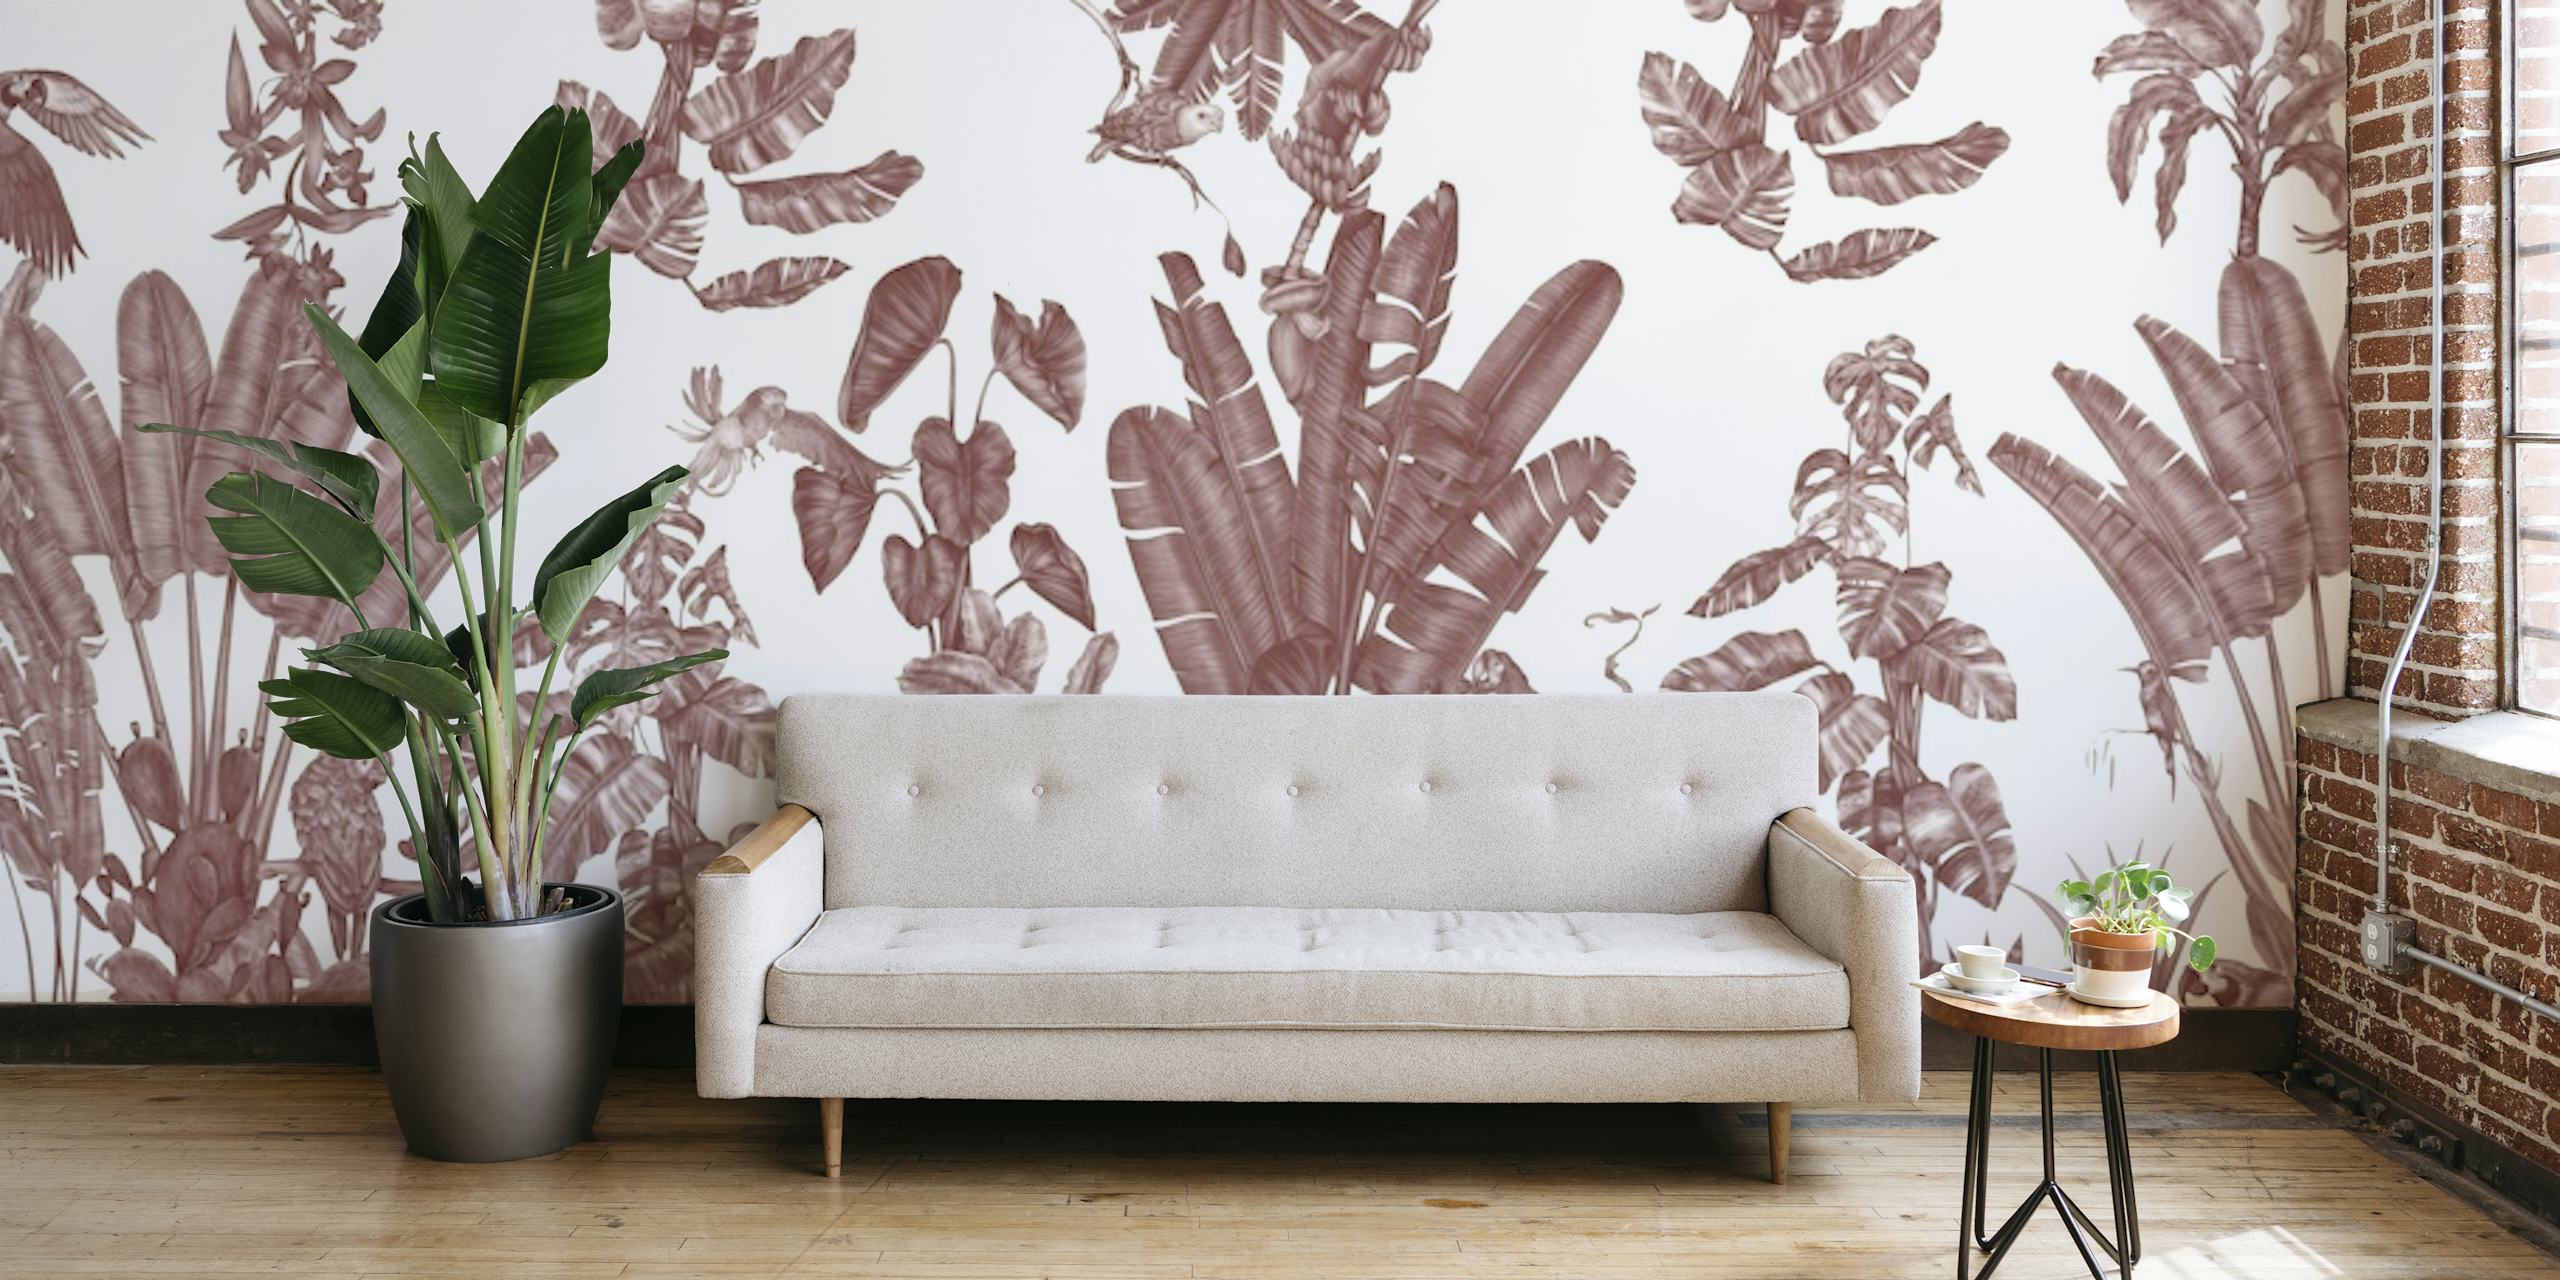 Red parrot and jungle foliage wall mural